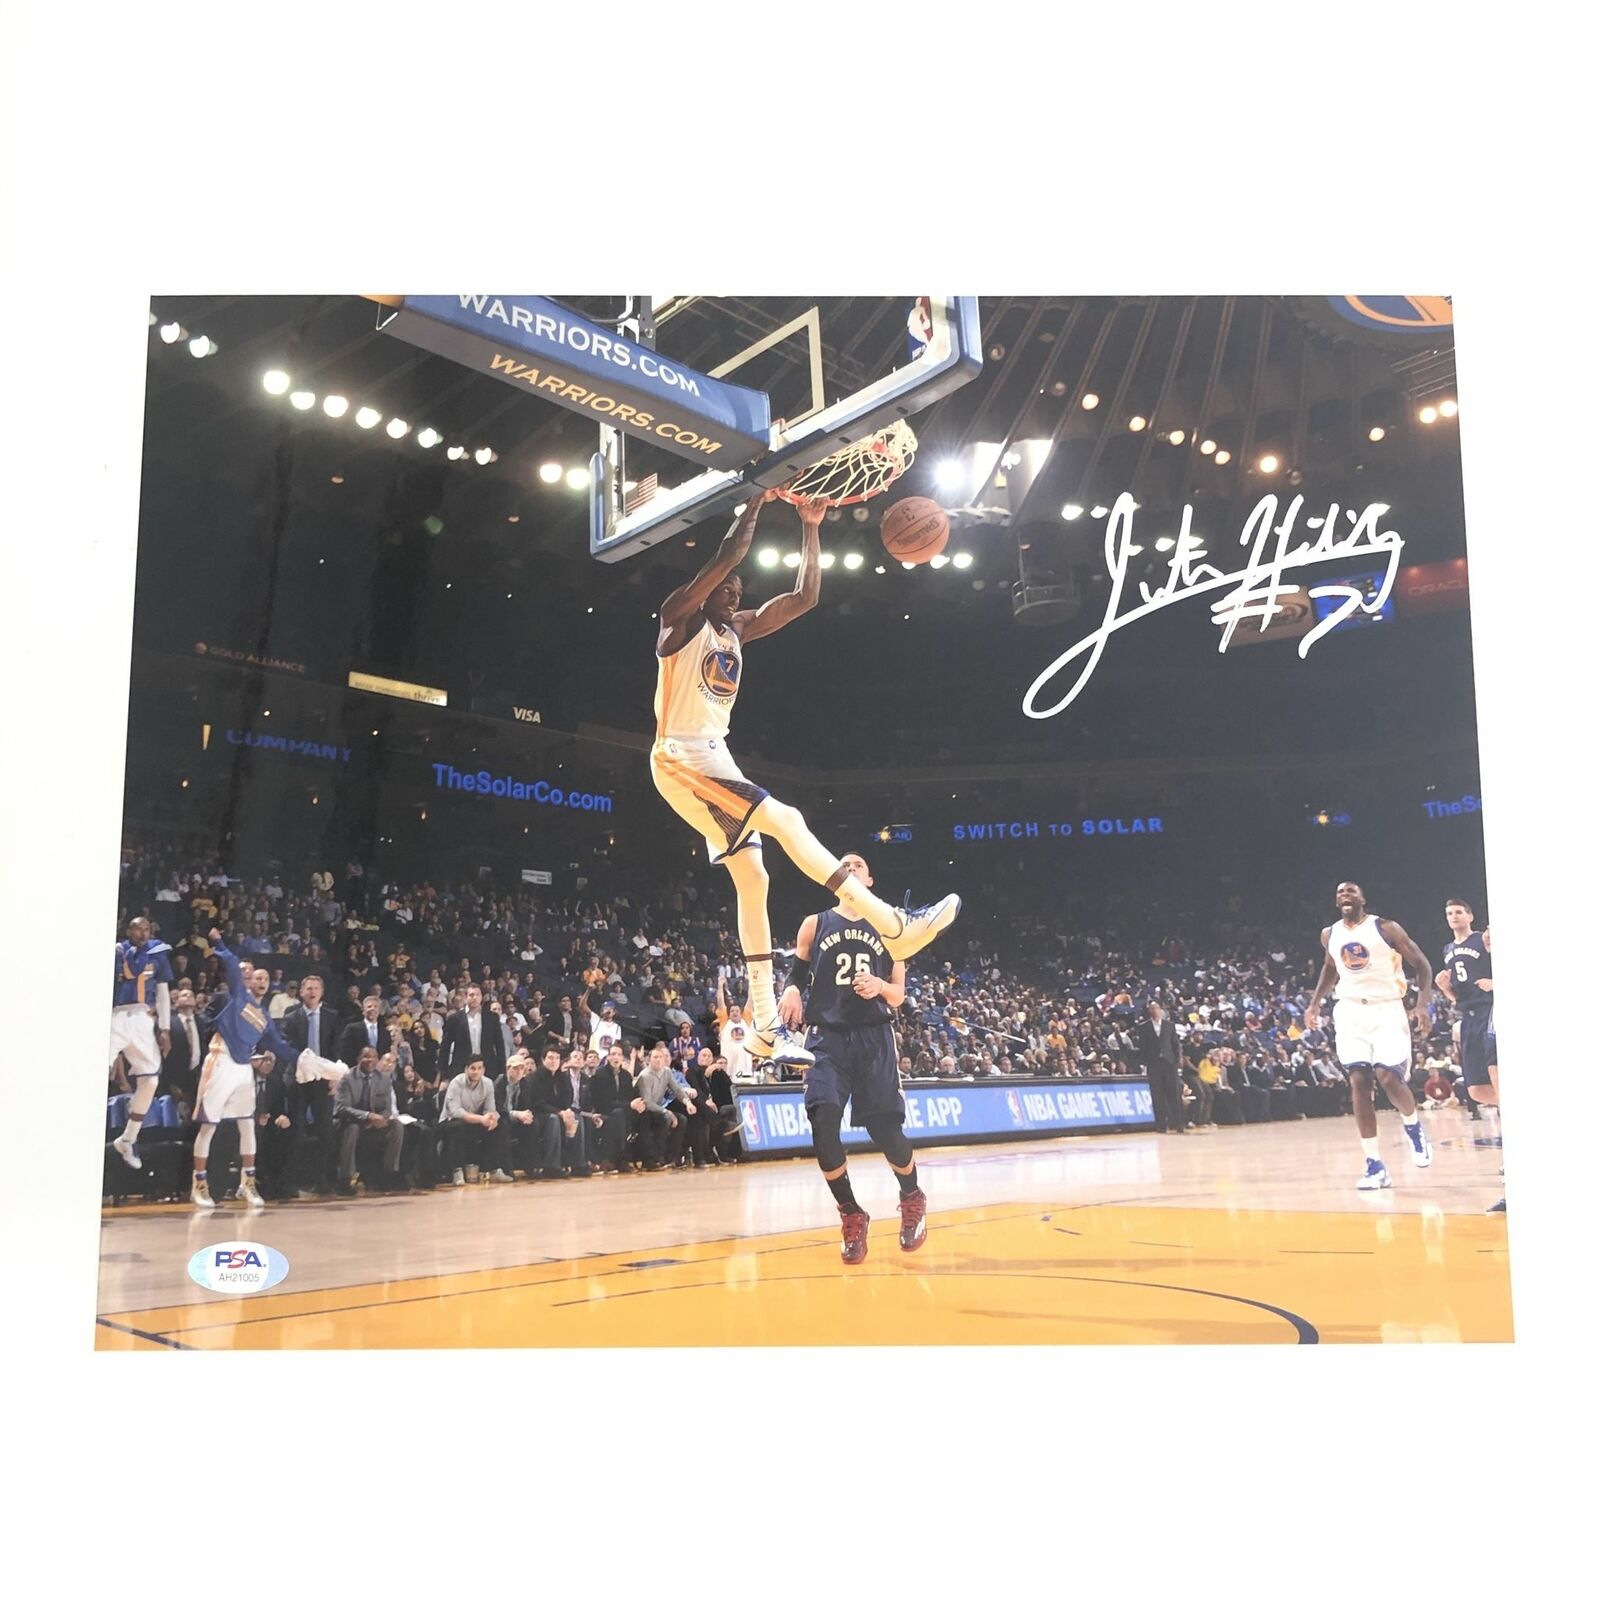 Justin Holiday signed 11x14 Photo Poster painting PSA/DNA Golden State Warriors Autographed